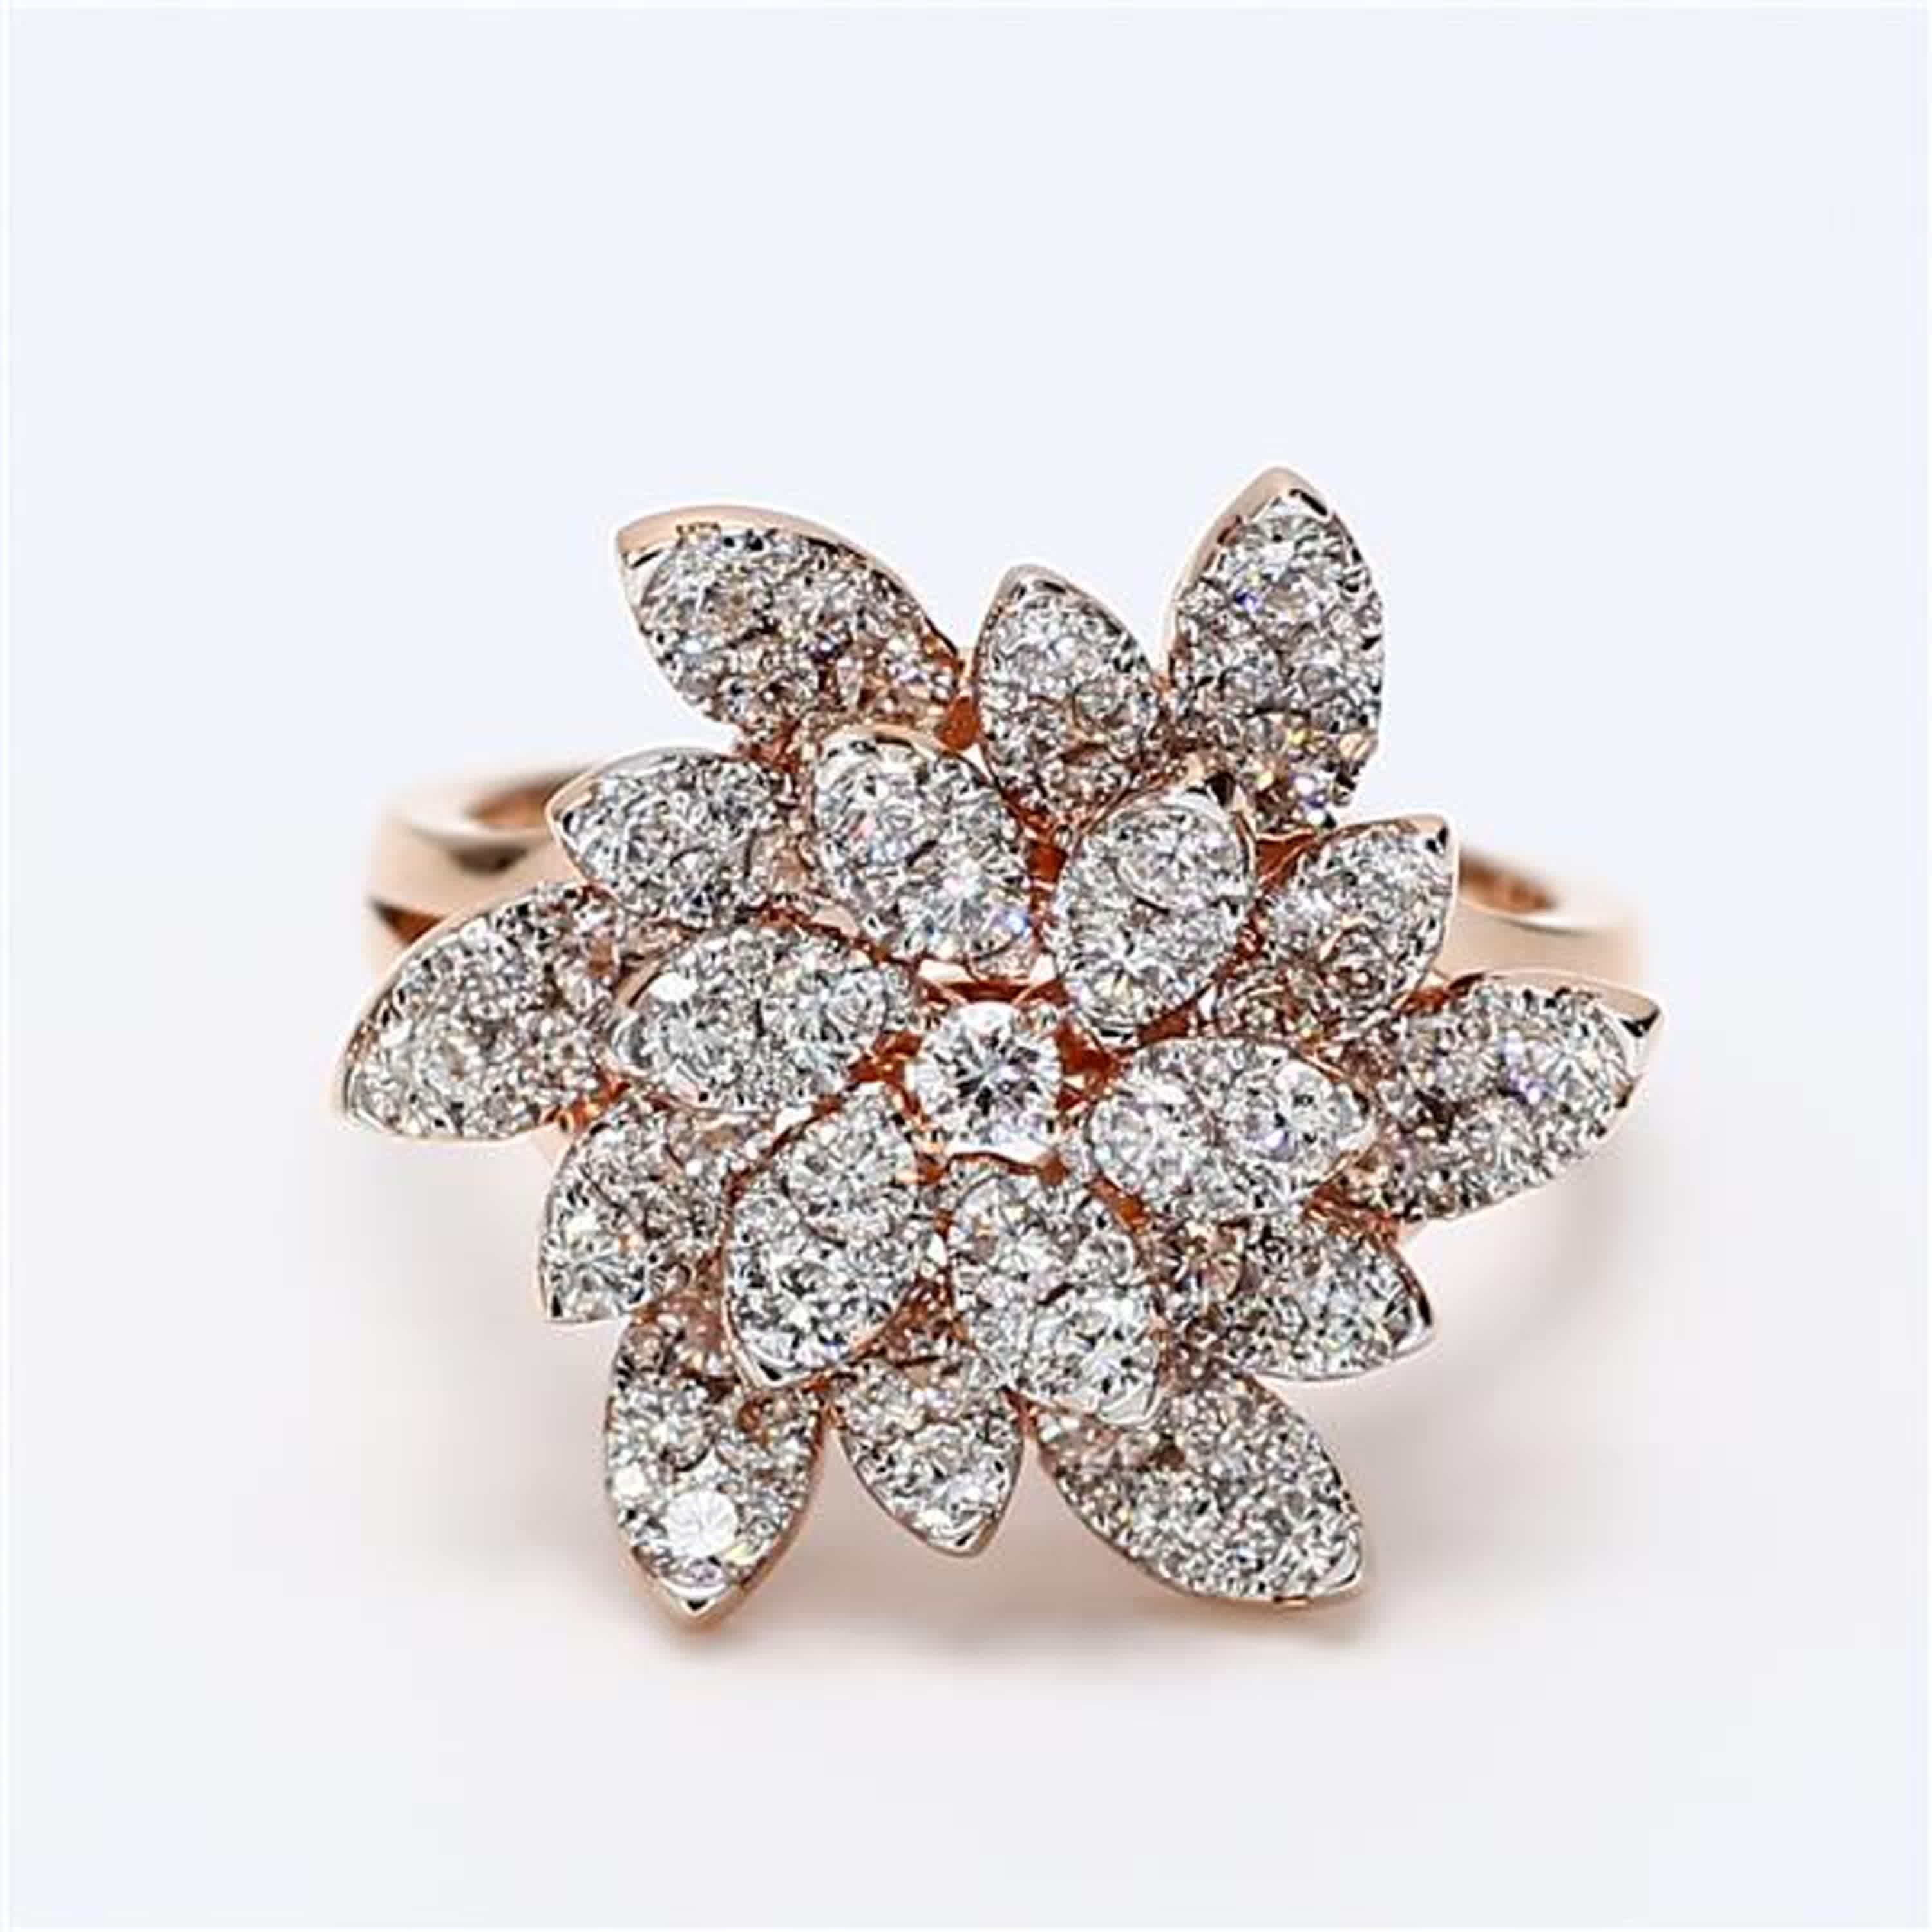 RareGemWorld's classic diamond ring. Mounted in a beautiful 18K Rose Gold setting with natural round white diamond melee in a beautiful flower shape. This ring is guaranteed to impress and enhance your personal collection!

Total Weight: